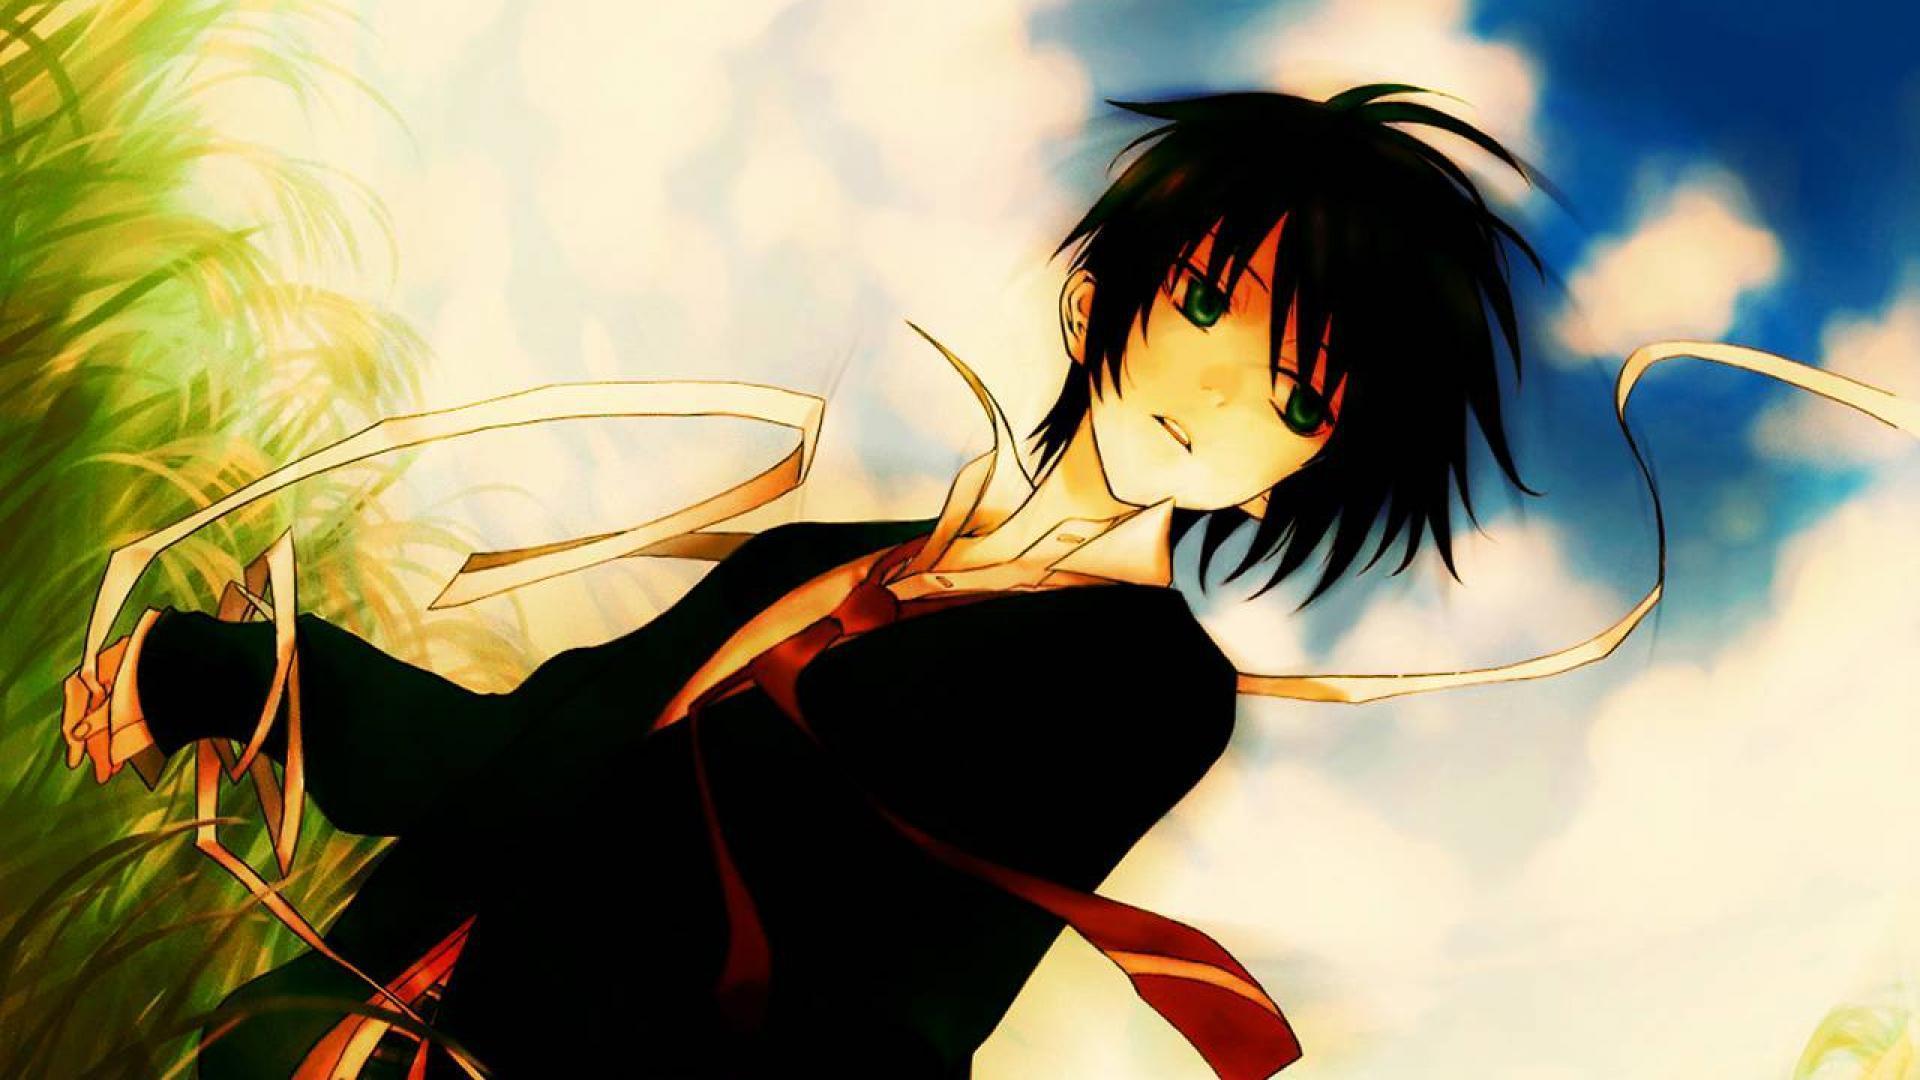 Anime Boy HD Backgrounds Wallpapers